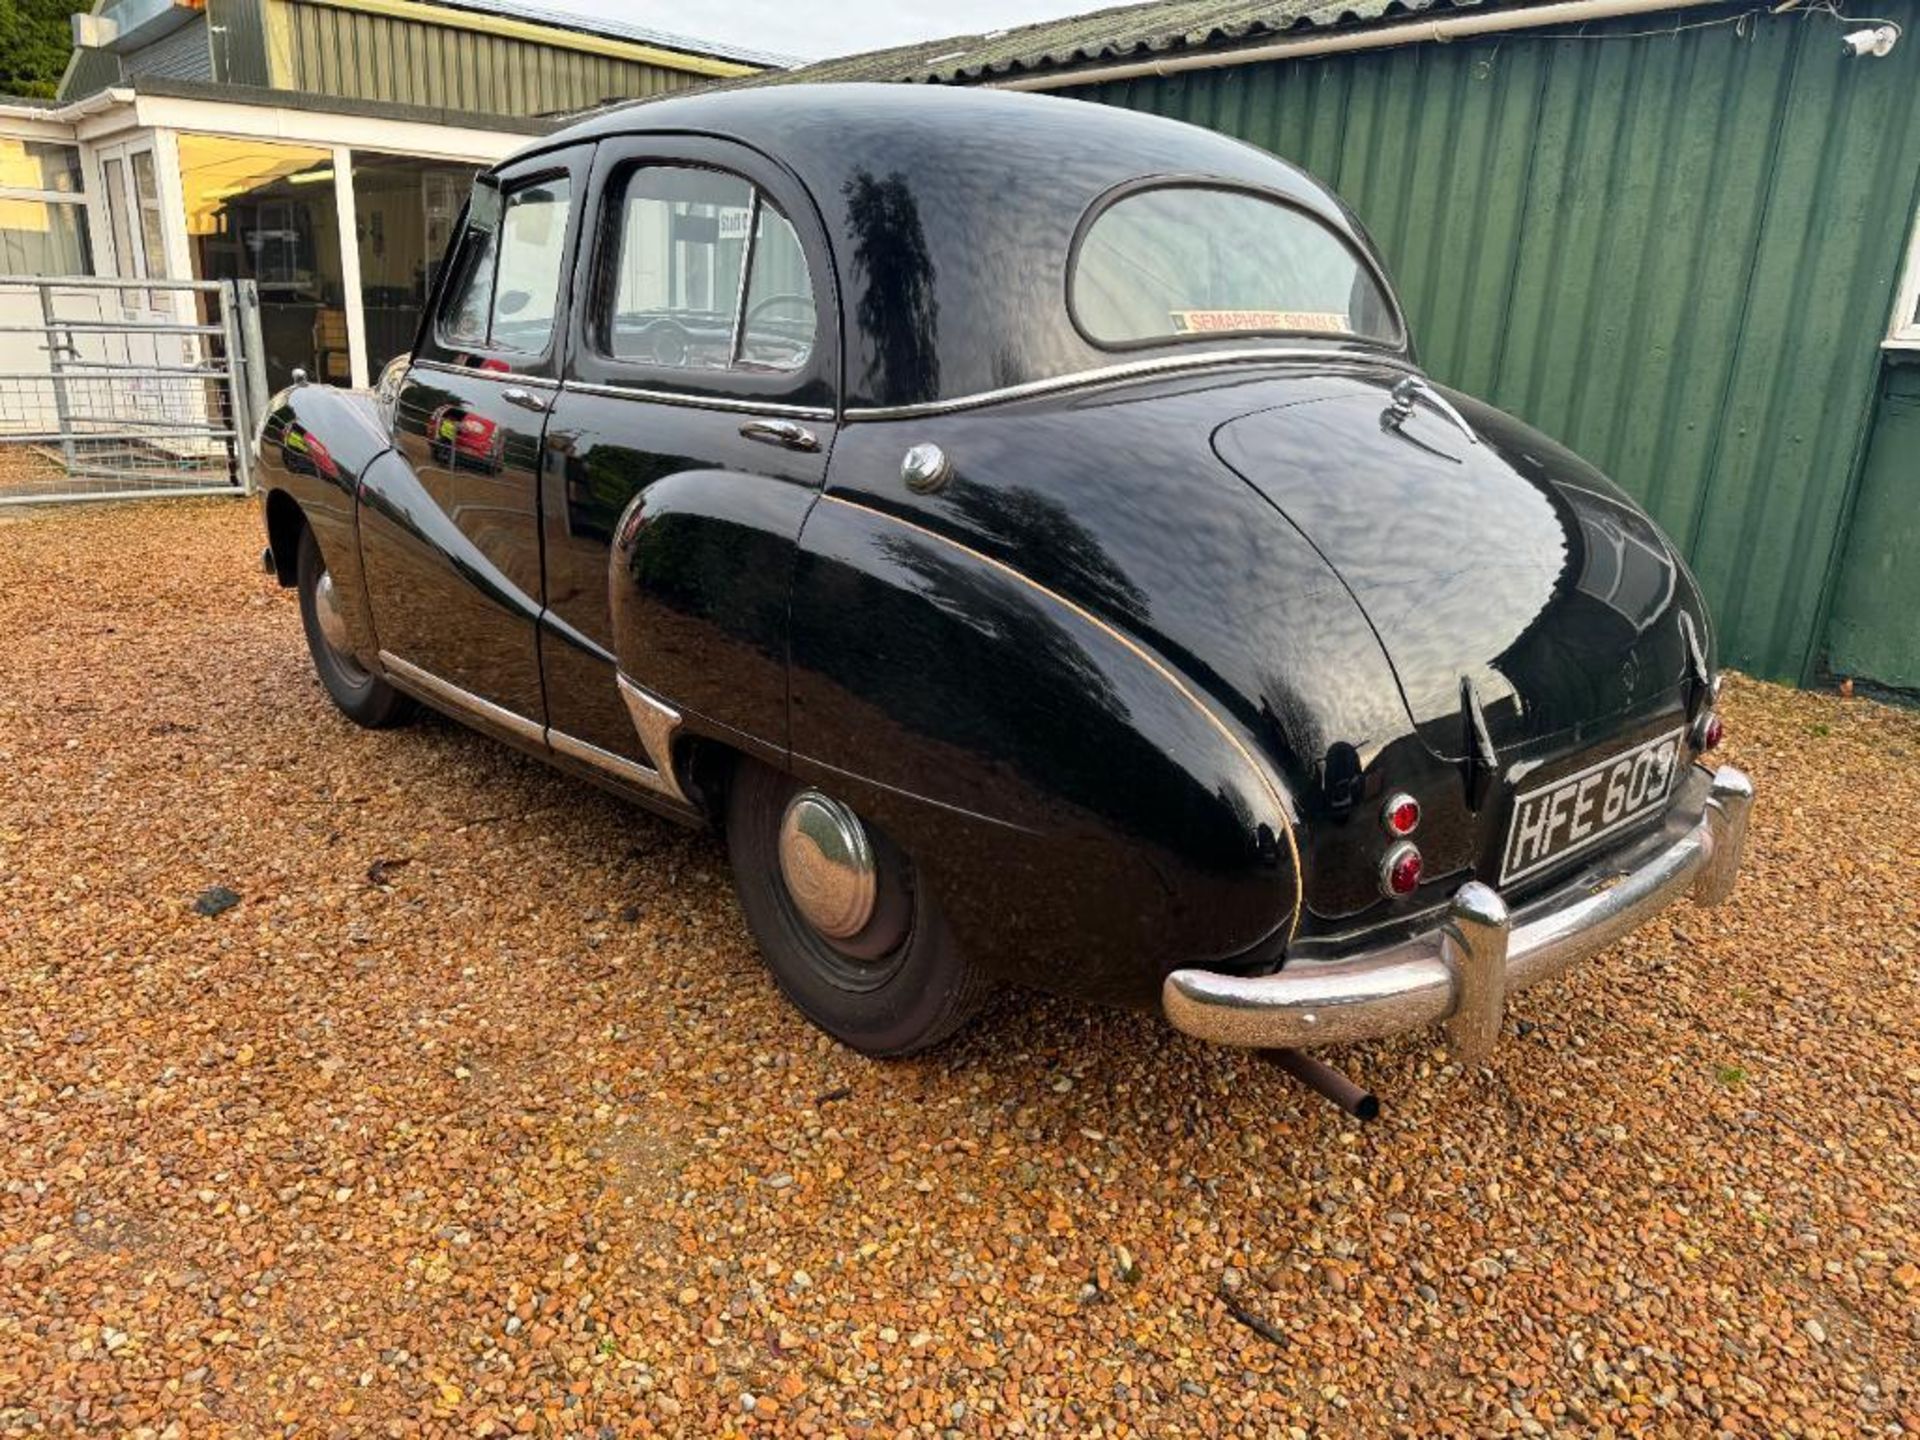 1954 Austin A40 Somerset black saloon car with 1200cc petrol engine, red leather interior and spare - Image 22 of 24